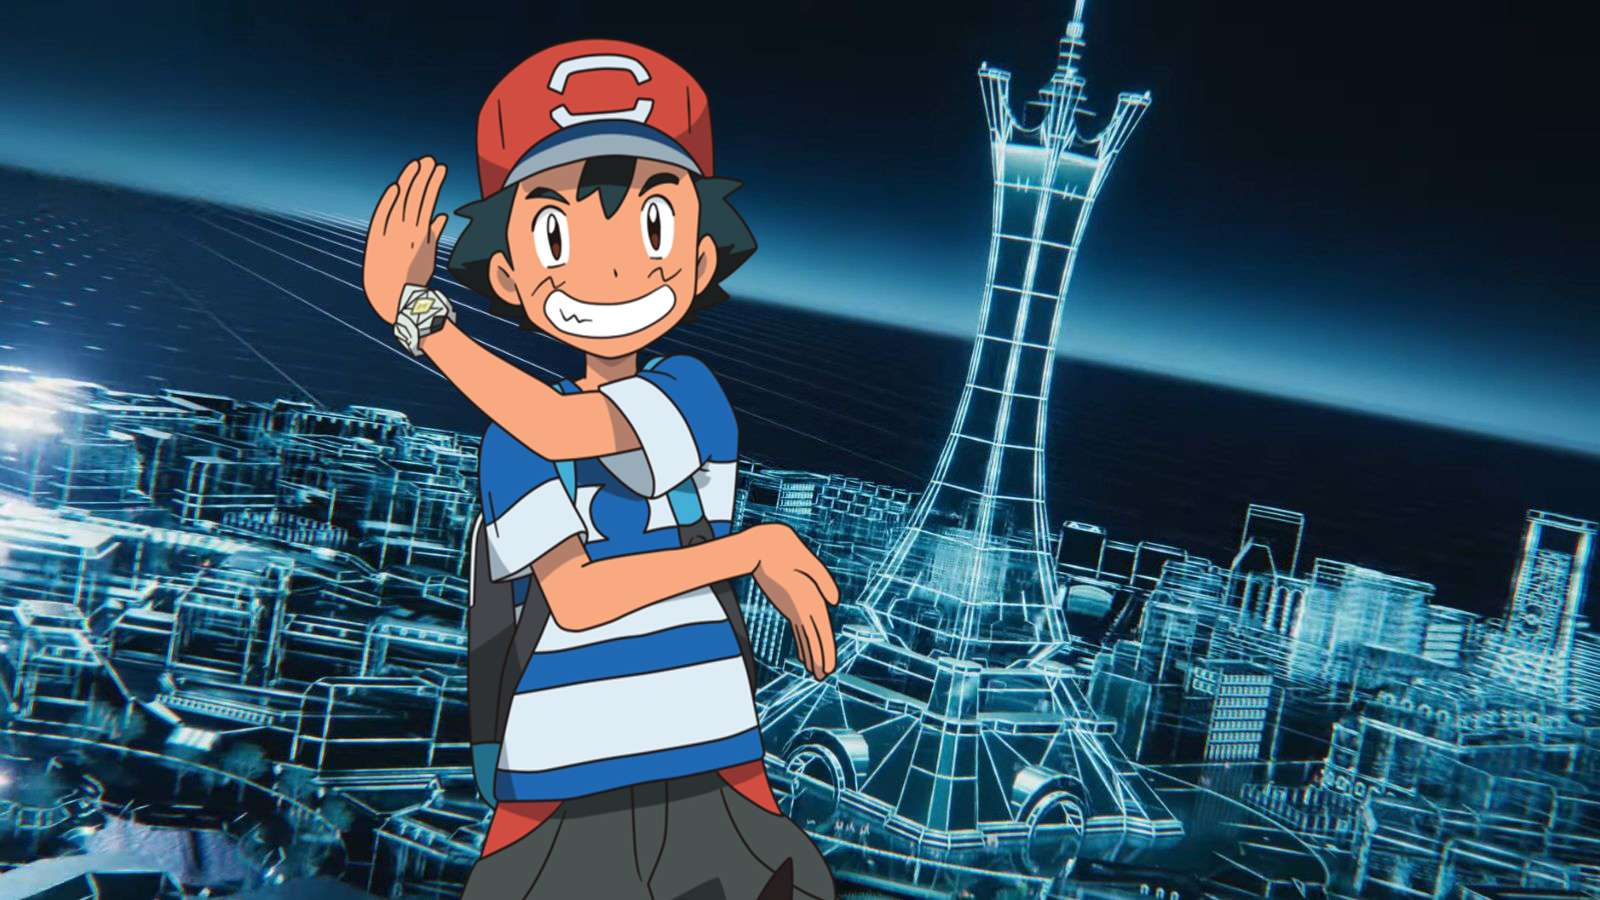 Ash surprised in front of Lumiose City